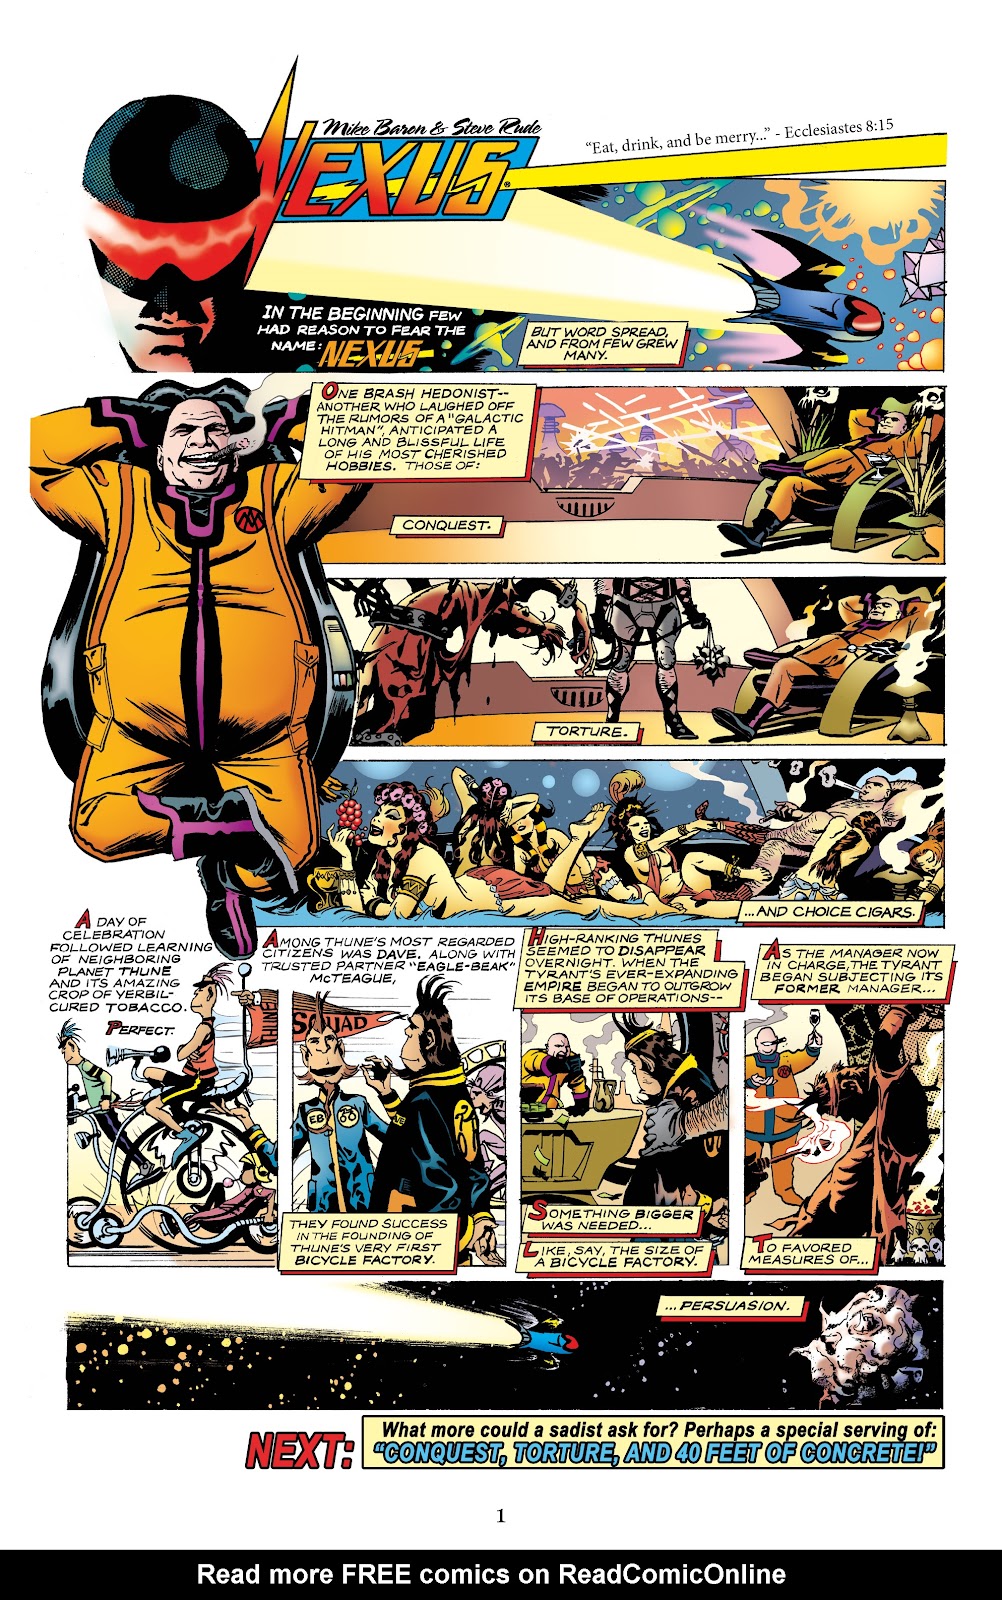 Nexus Newspaper Strips Vol 2: The Battle For Thuneworld issue 1 - Page 3